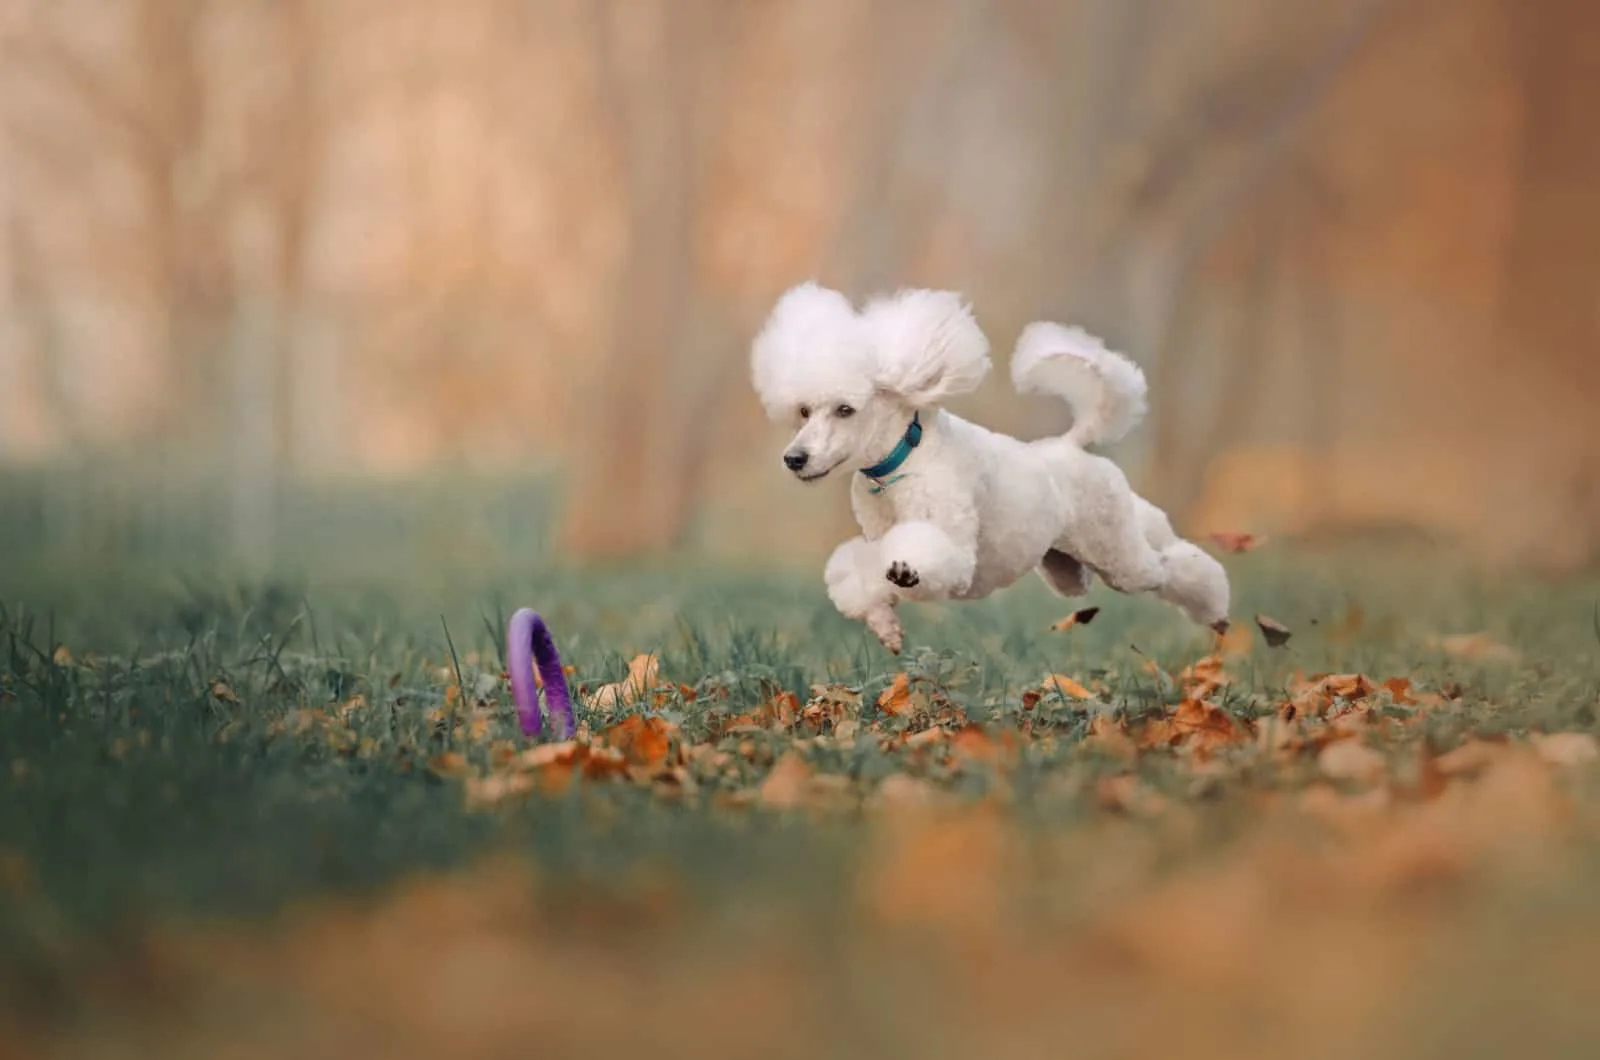 moyen poodle playing with a toy